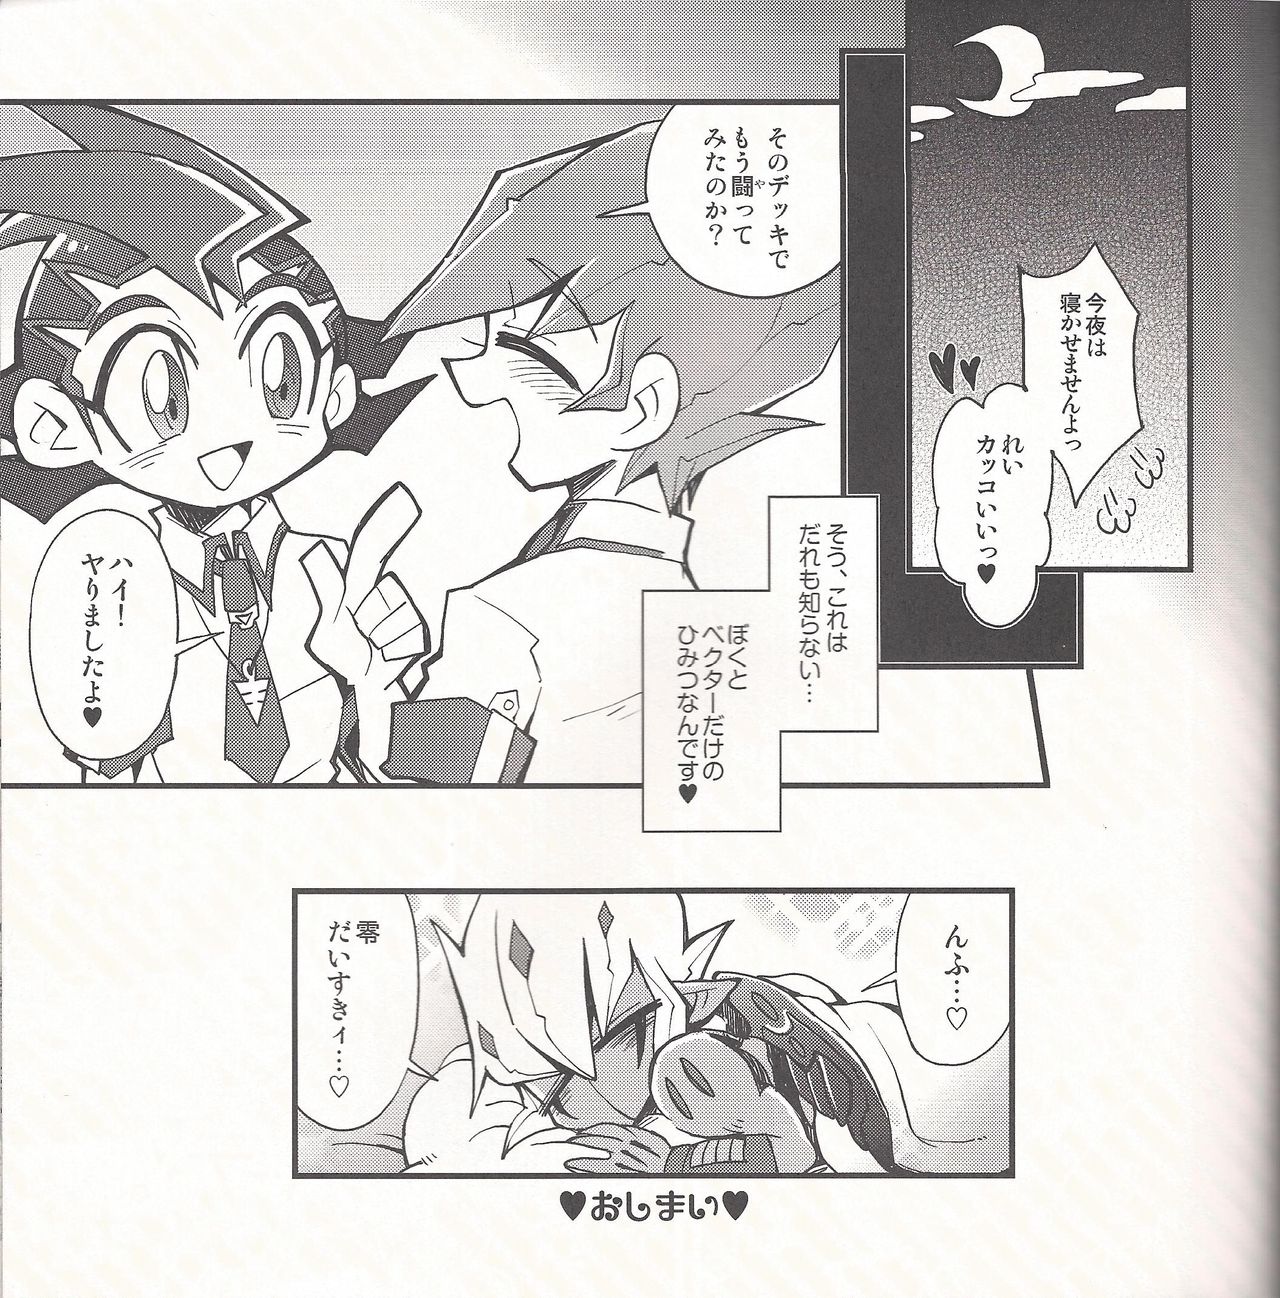 (DUEL PARTY2) [JINBOW (Chiyo, Hatch, Yosuke)] Pajama Party in the Starry Heaven (Yu-Gi-Oh! Zexal) page 10 full